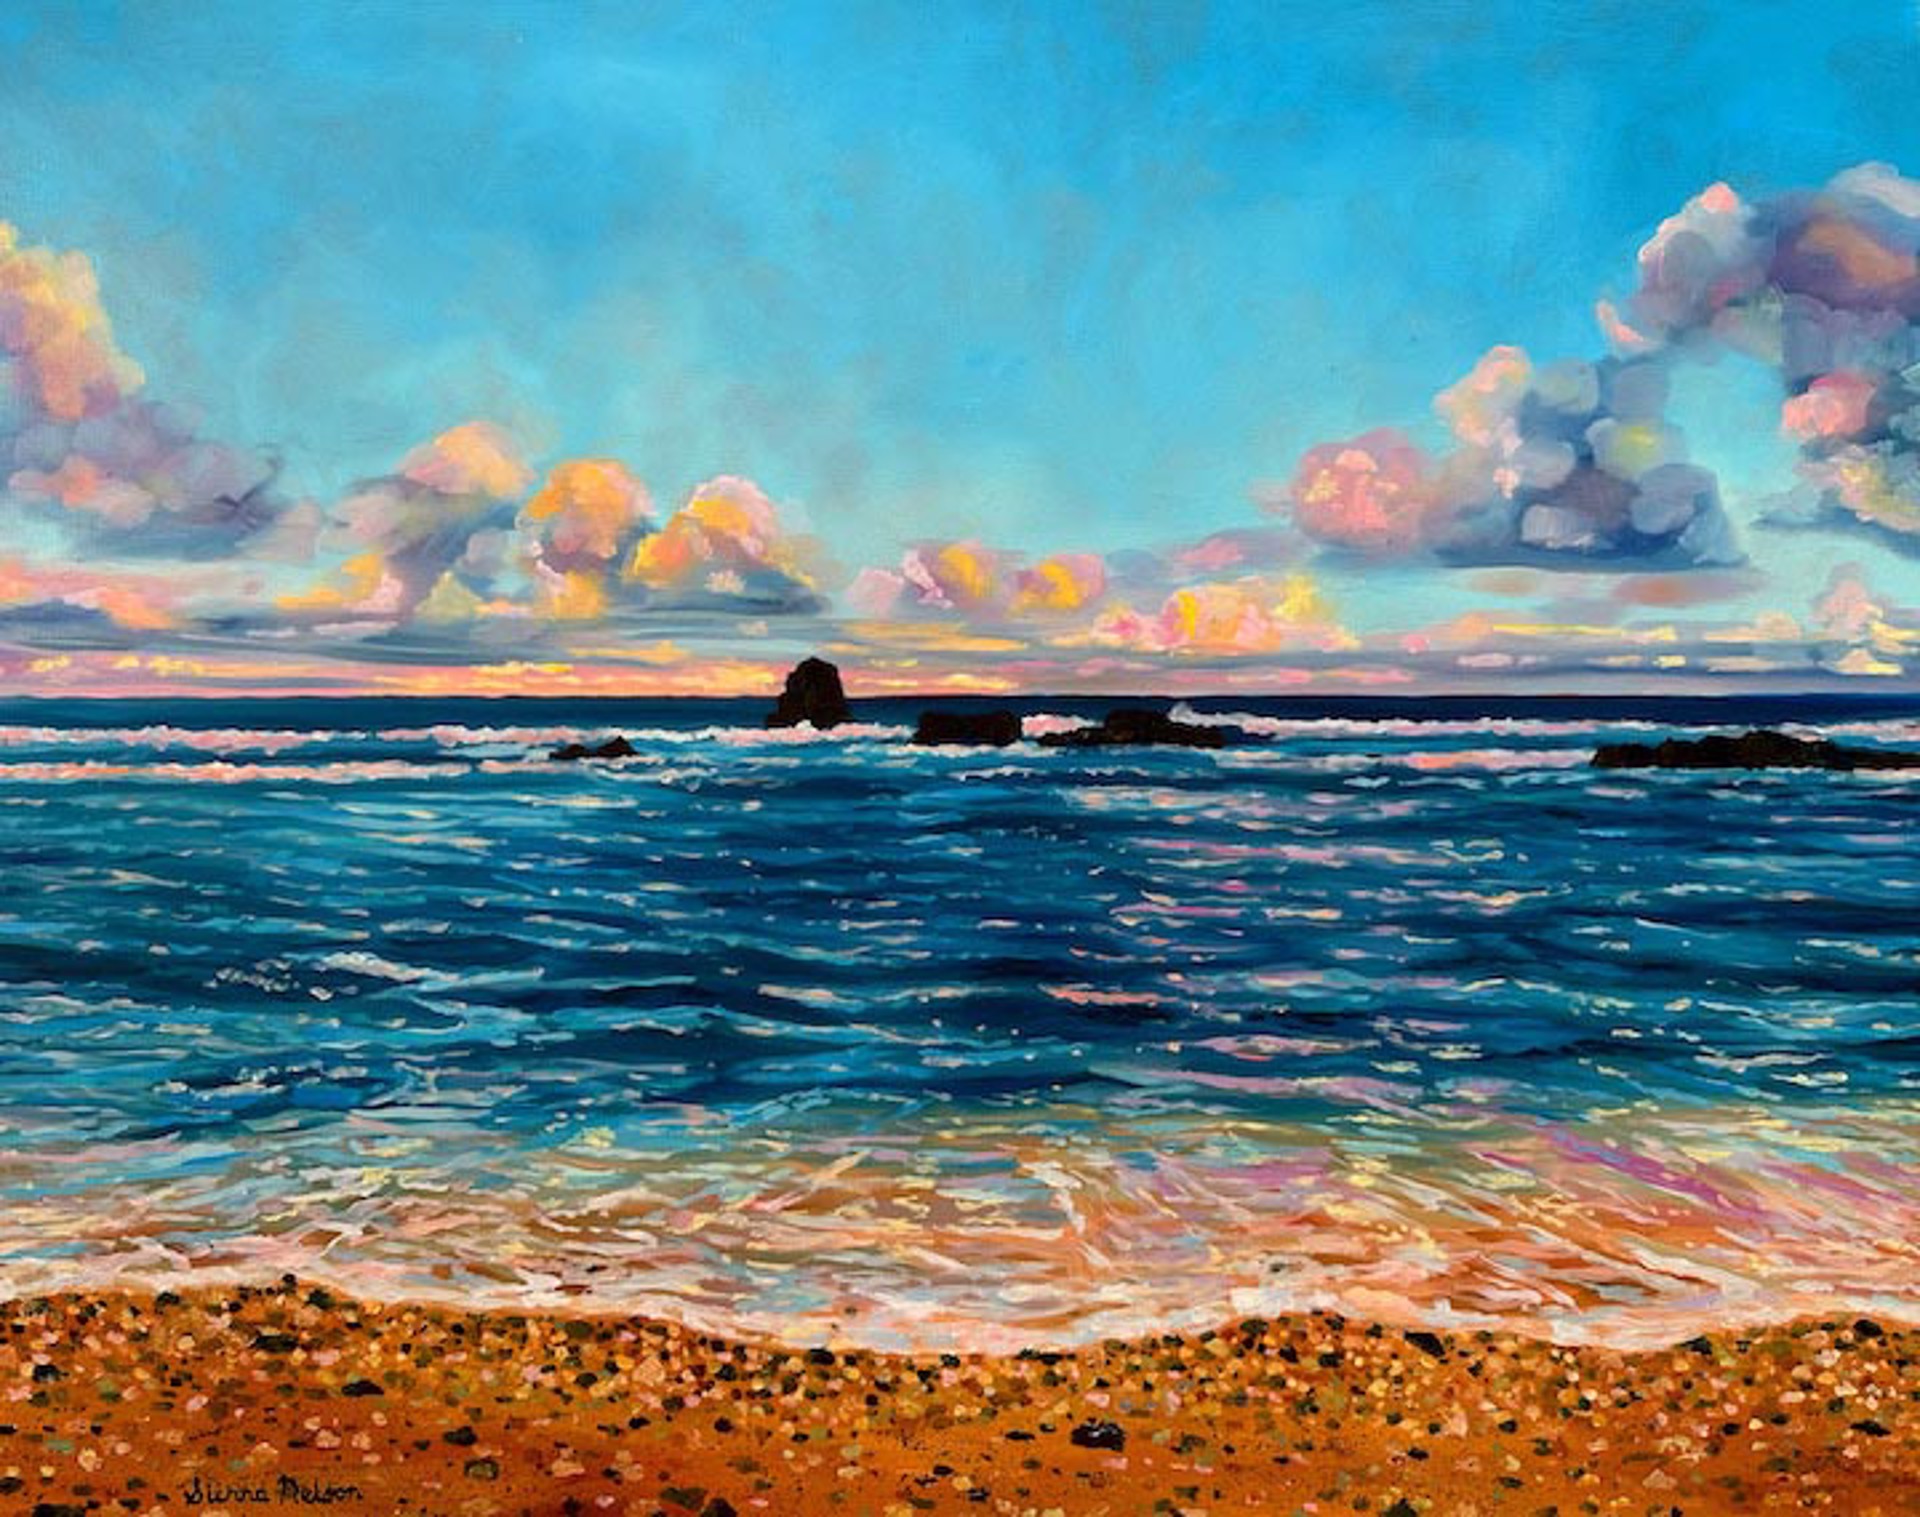 Maui Daydream At Dusk by Sienna Nelson